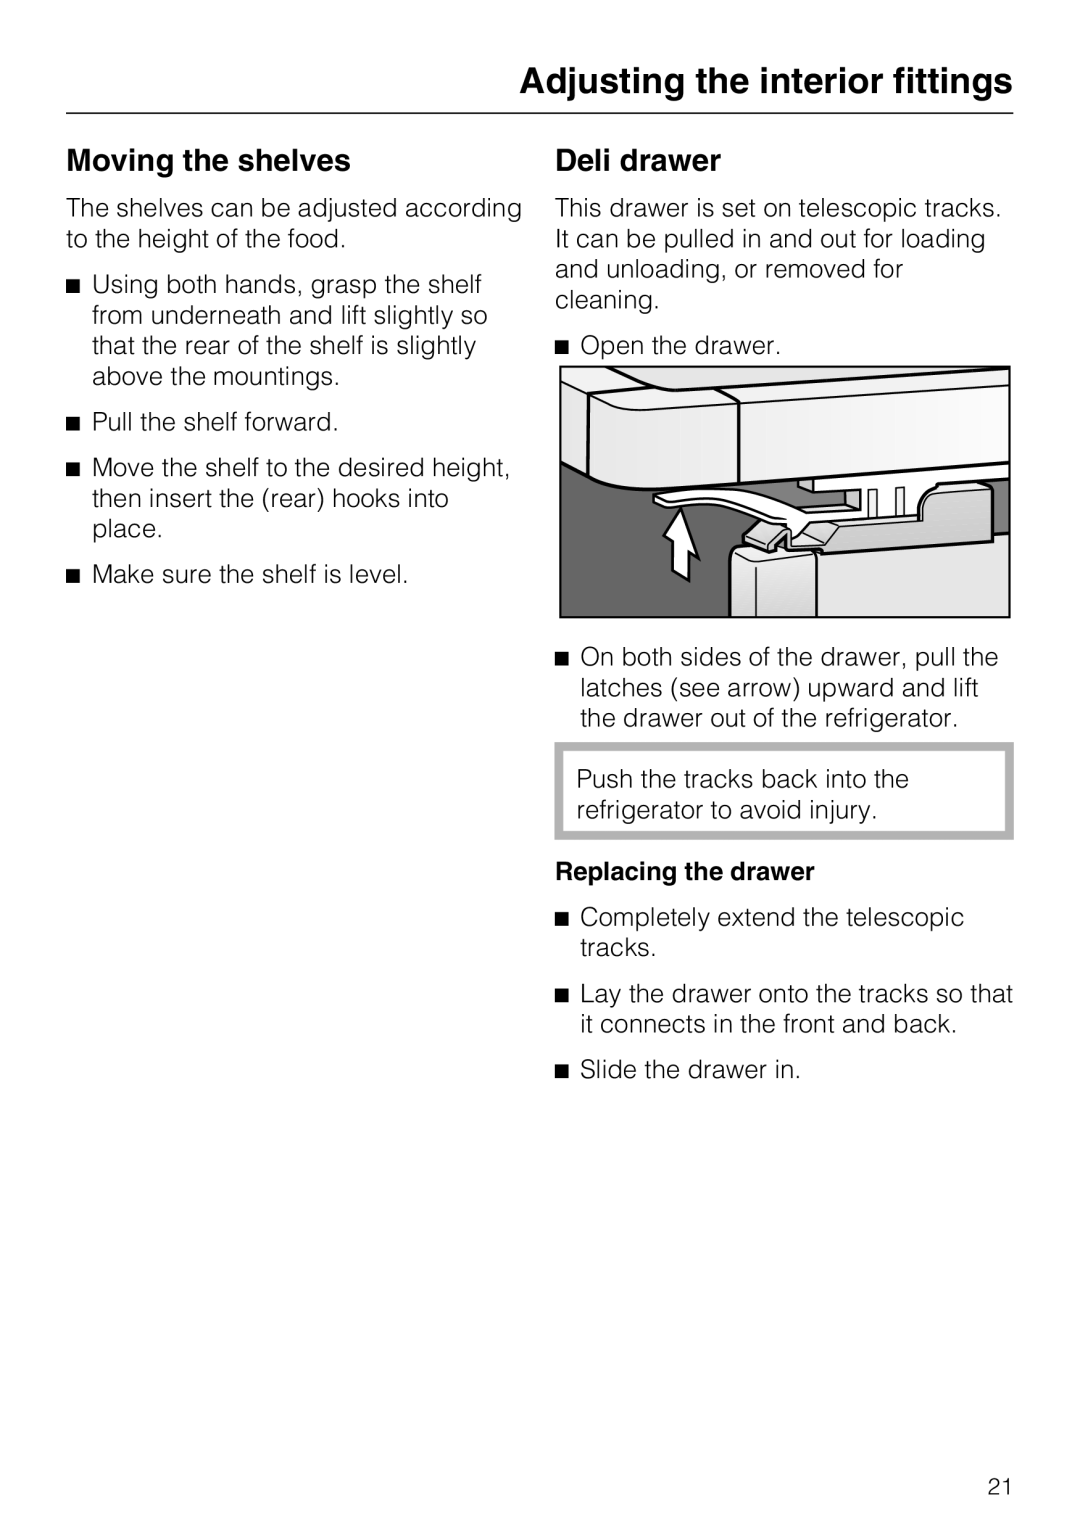 Miele 09 920 570 installation instructions Adjusting the interior fittings, Moving the shelves, Deli drawer 